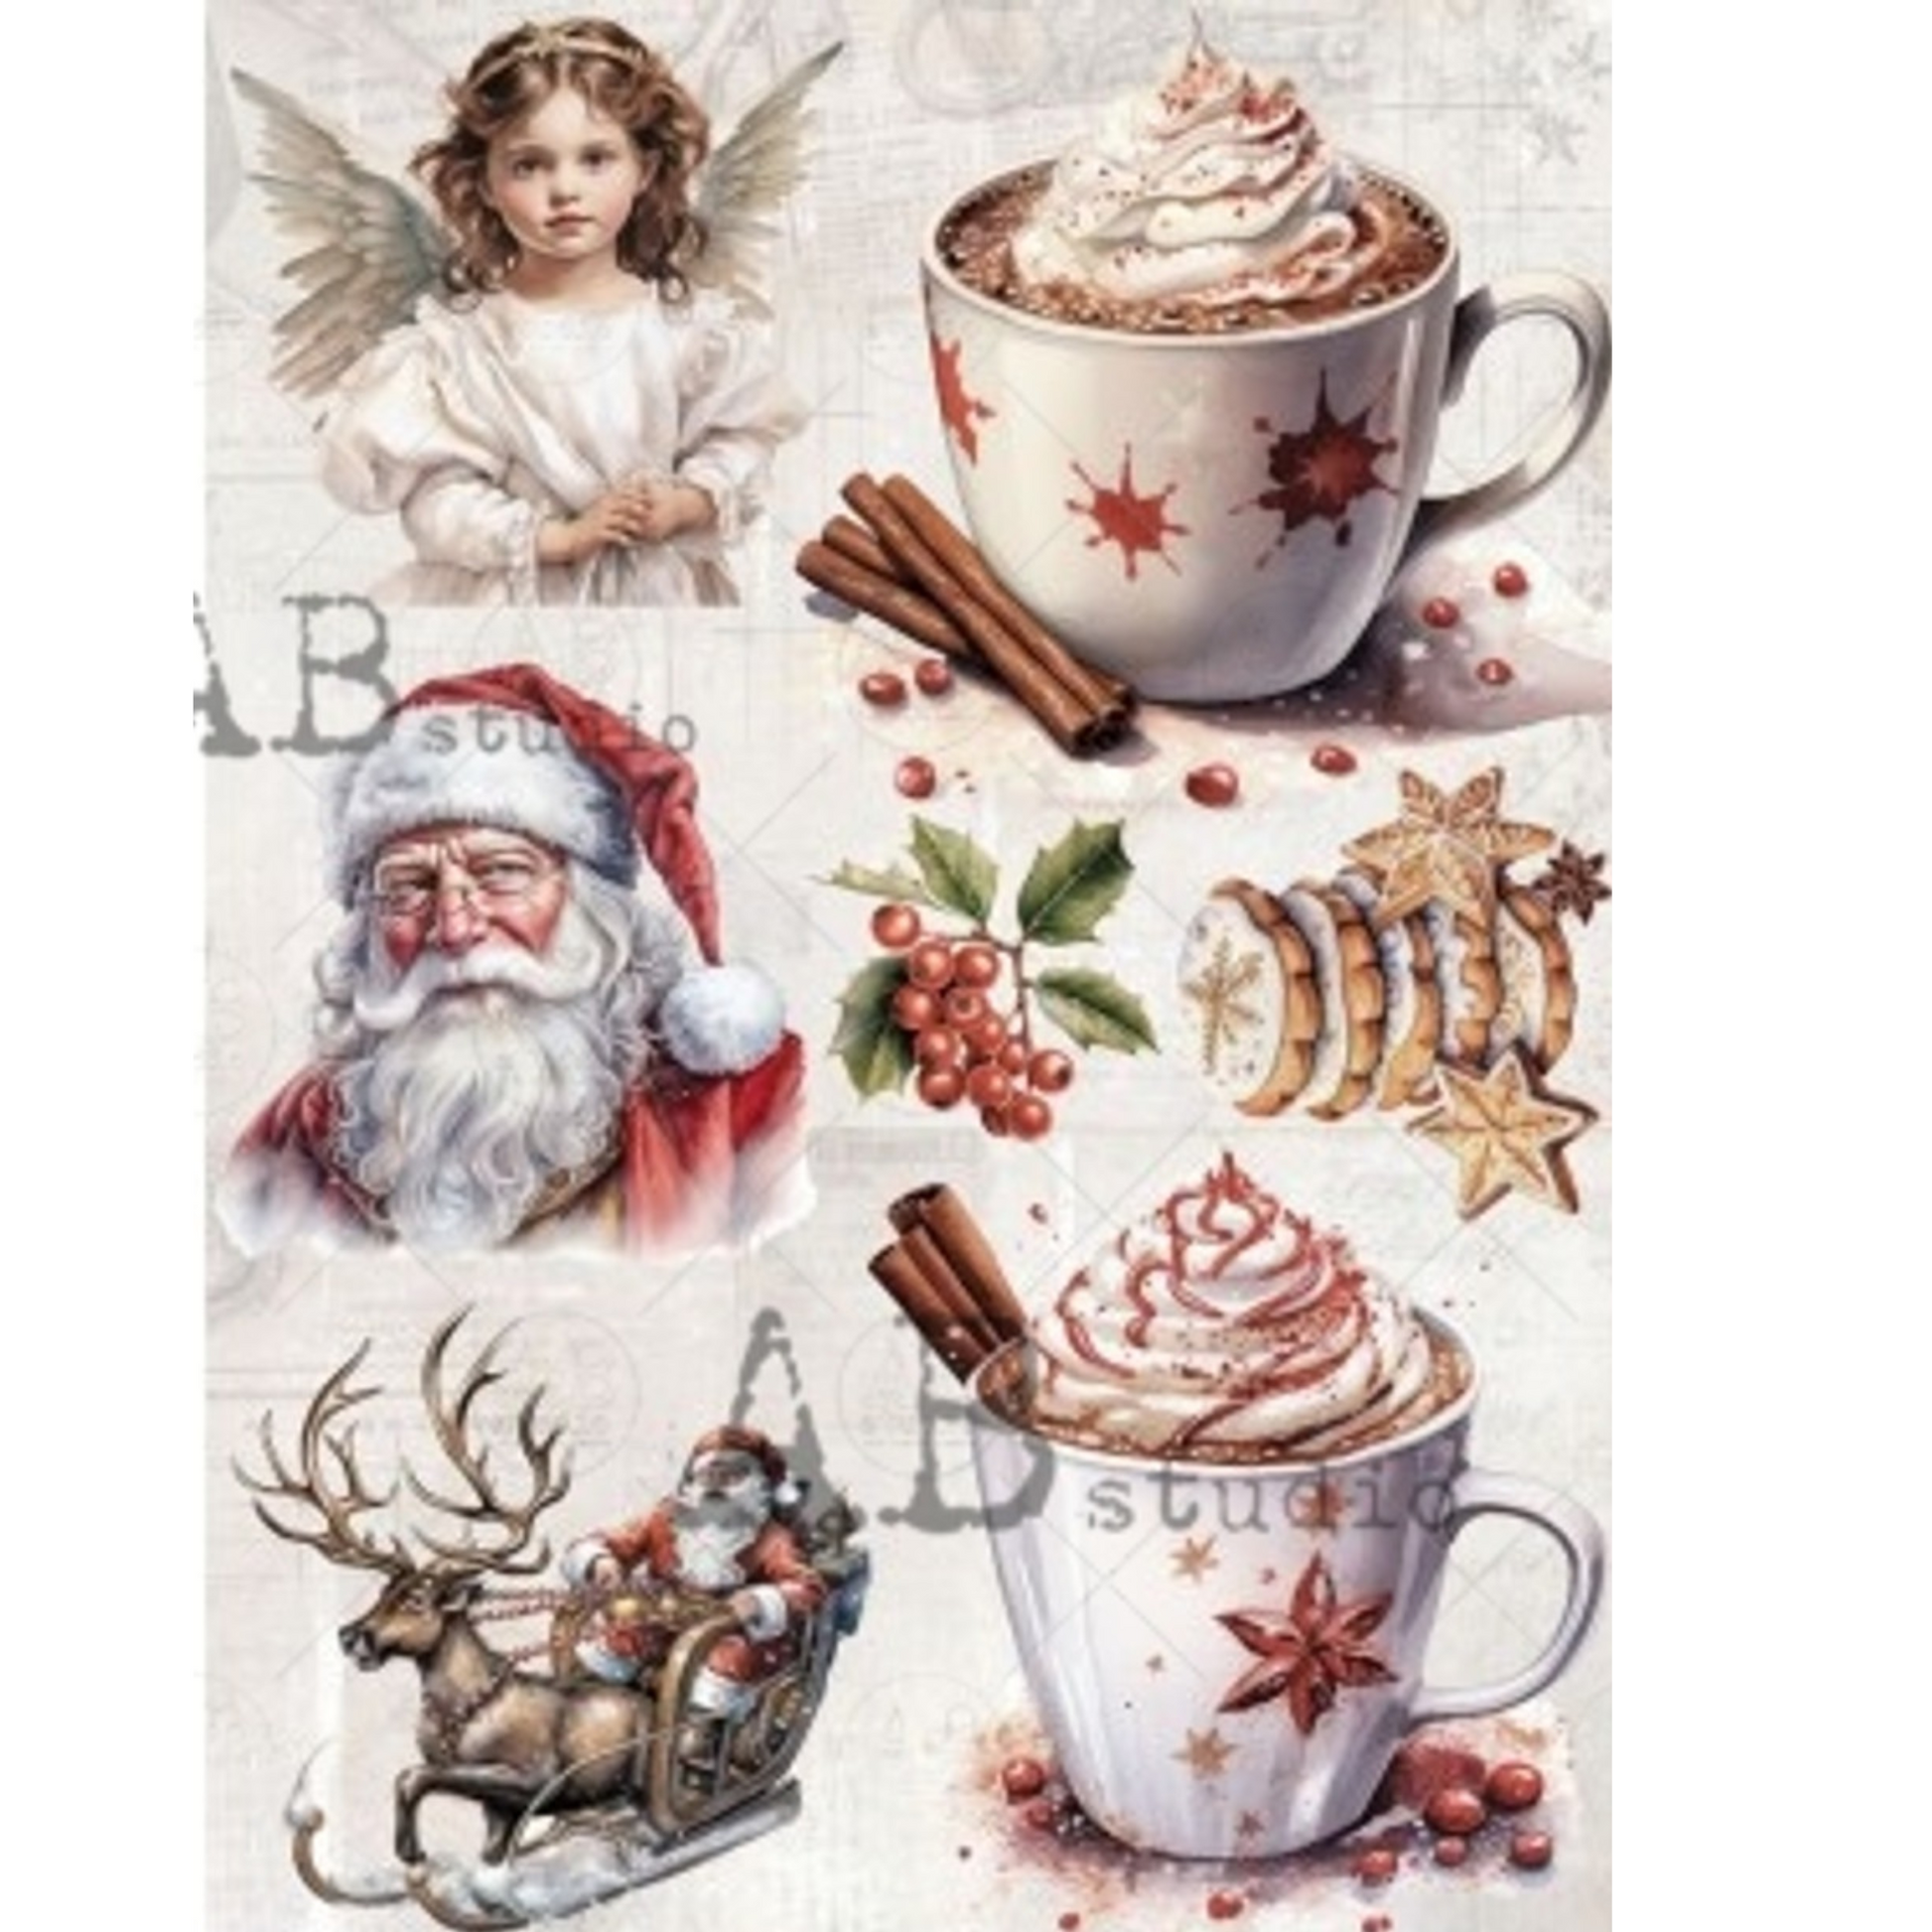 "Peppermint Cocoa" decoupage rice paper by AB Studio. Available at Milton's Daughter.